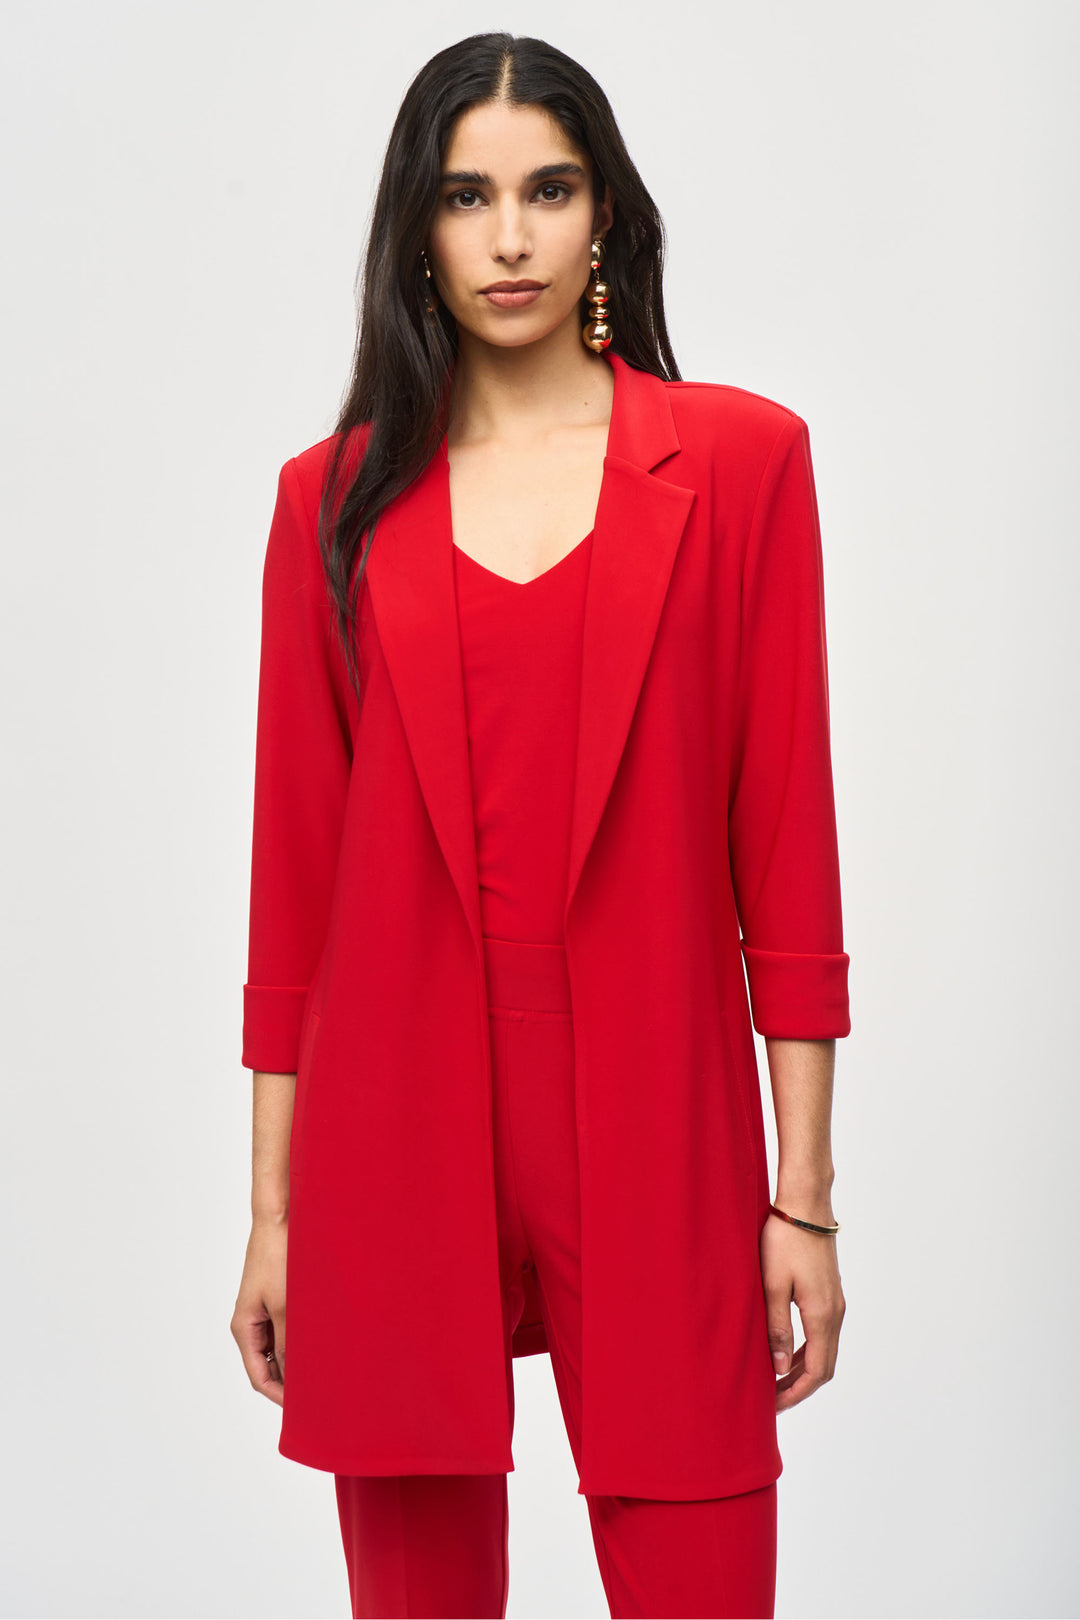 Joseph Ribkoff Fall 2024 It is made of eggshell woven fabric and features a notched collar, three-quarter length sleeves with cuffs, and a side slit.